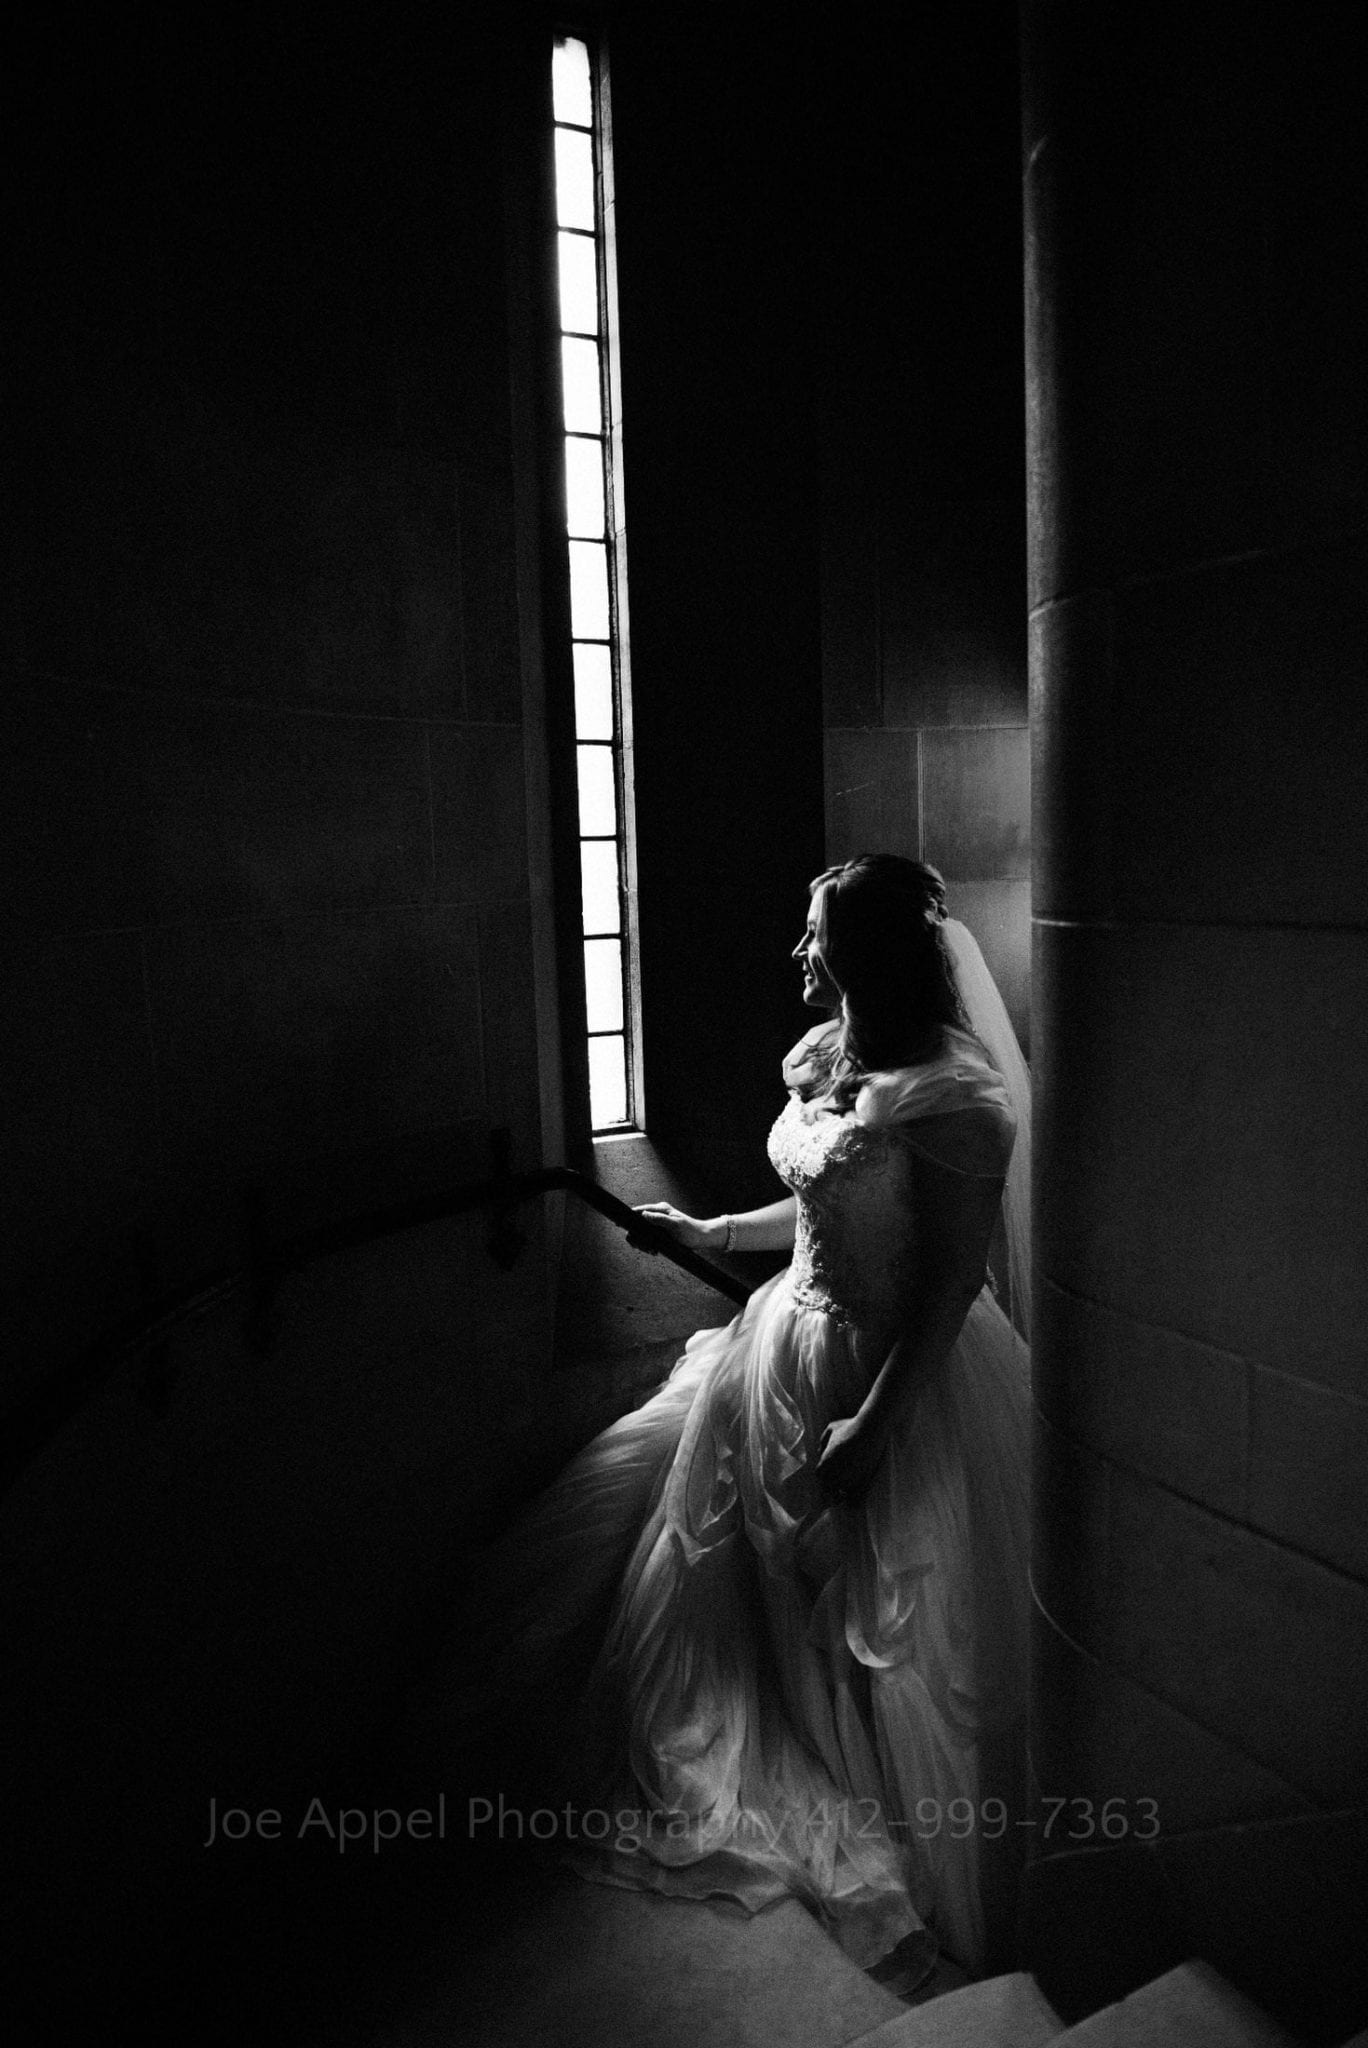 A bride is illuminated by a tall, narrow window as she walks up the stone stairs from the basement at Heinz Memorial chapel.